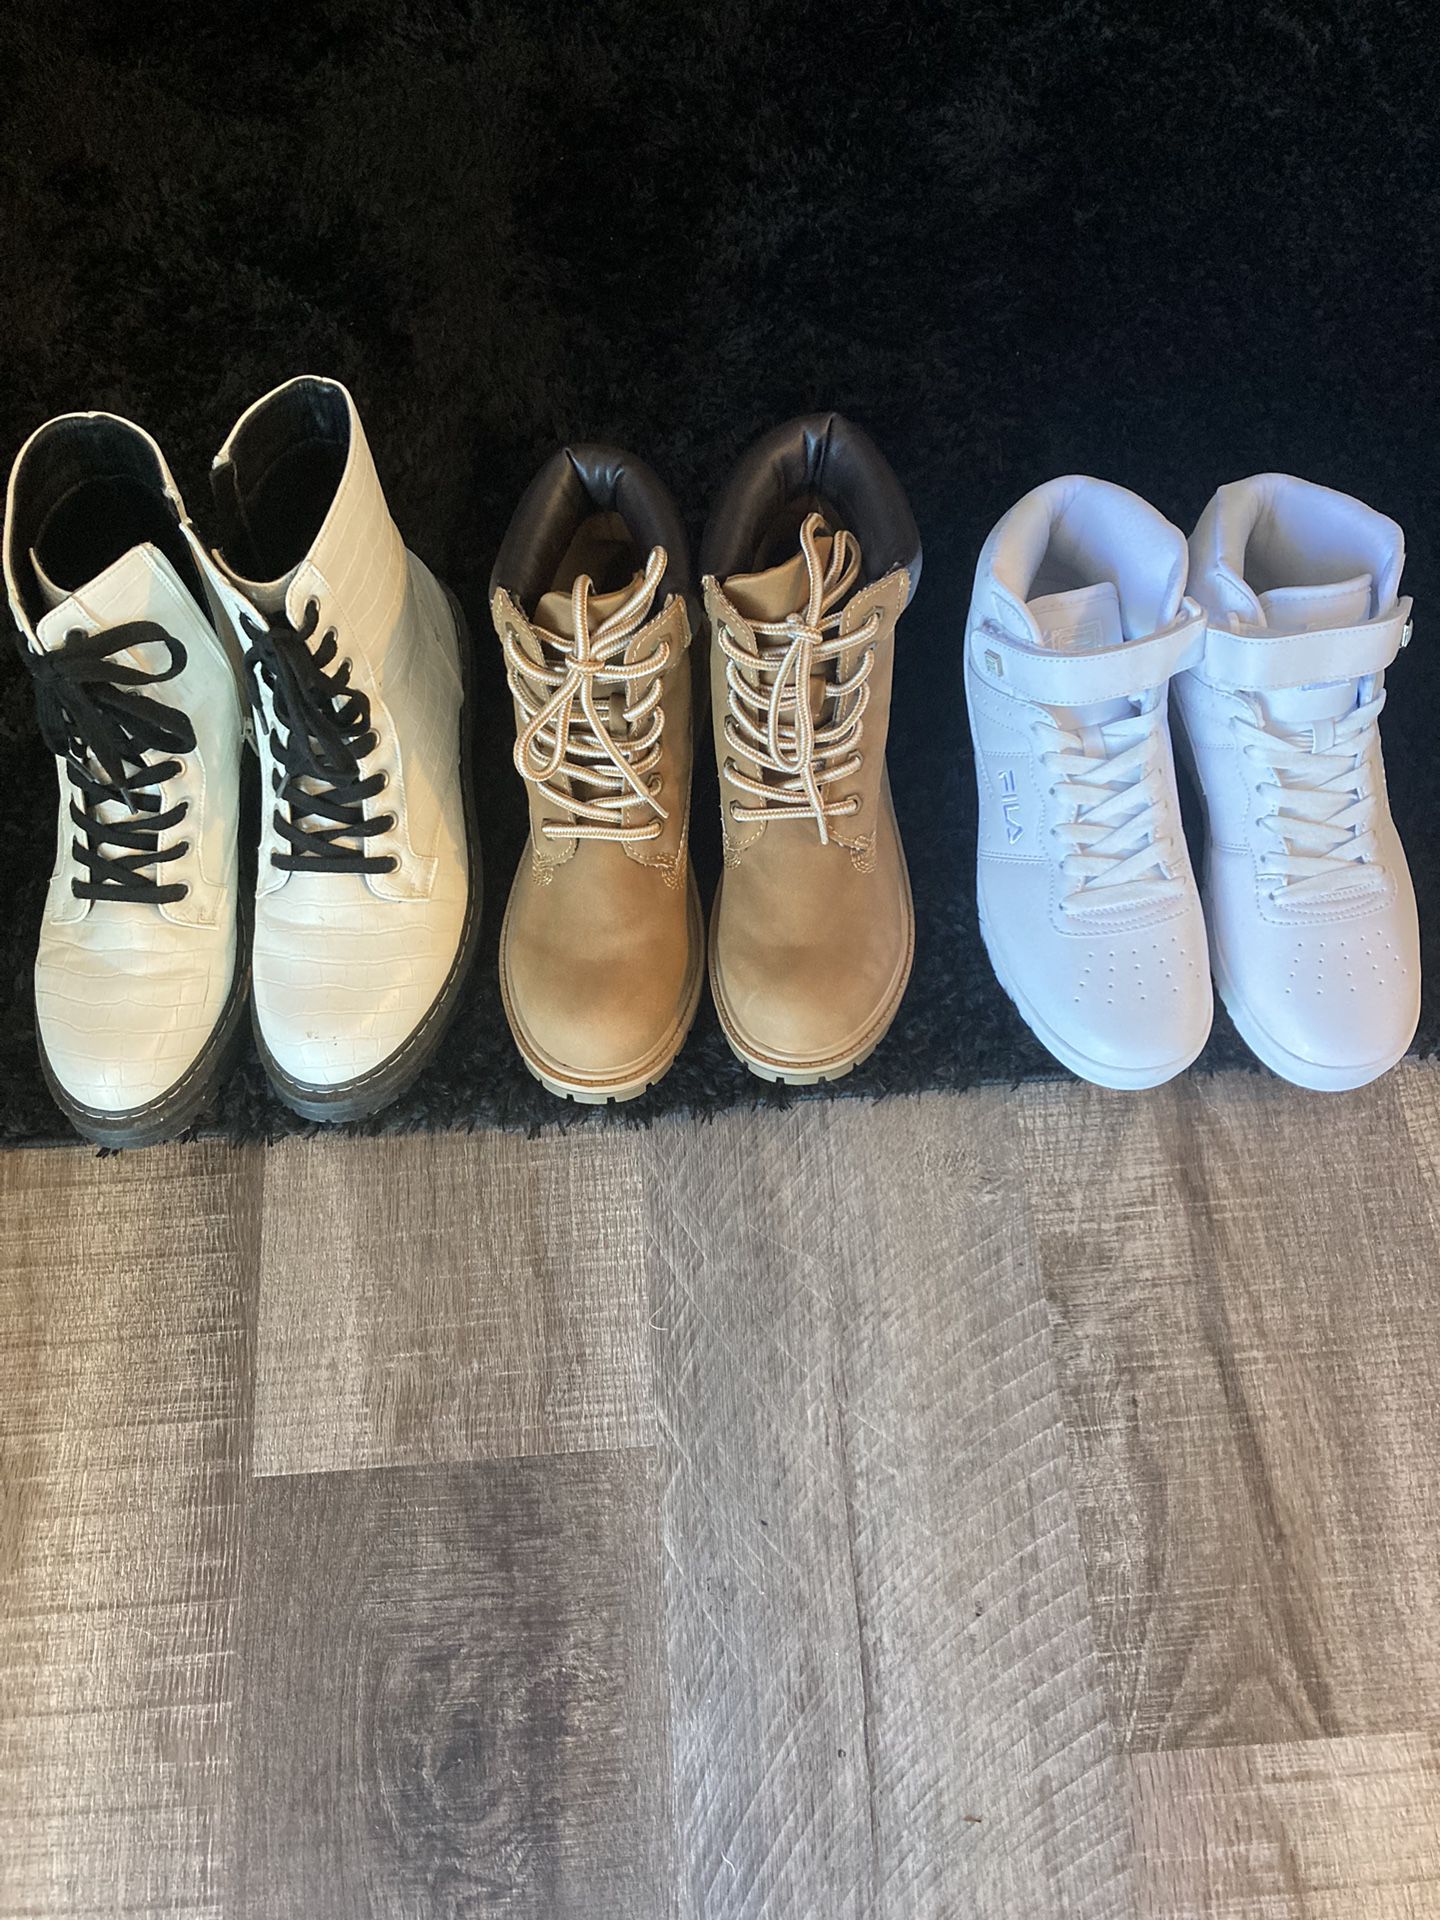 Three Pairs Of Flawless Combat Boots And Fila Sneakers In Willoughby Ohio. $50 takes all three pairs! Brand new!